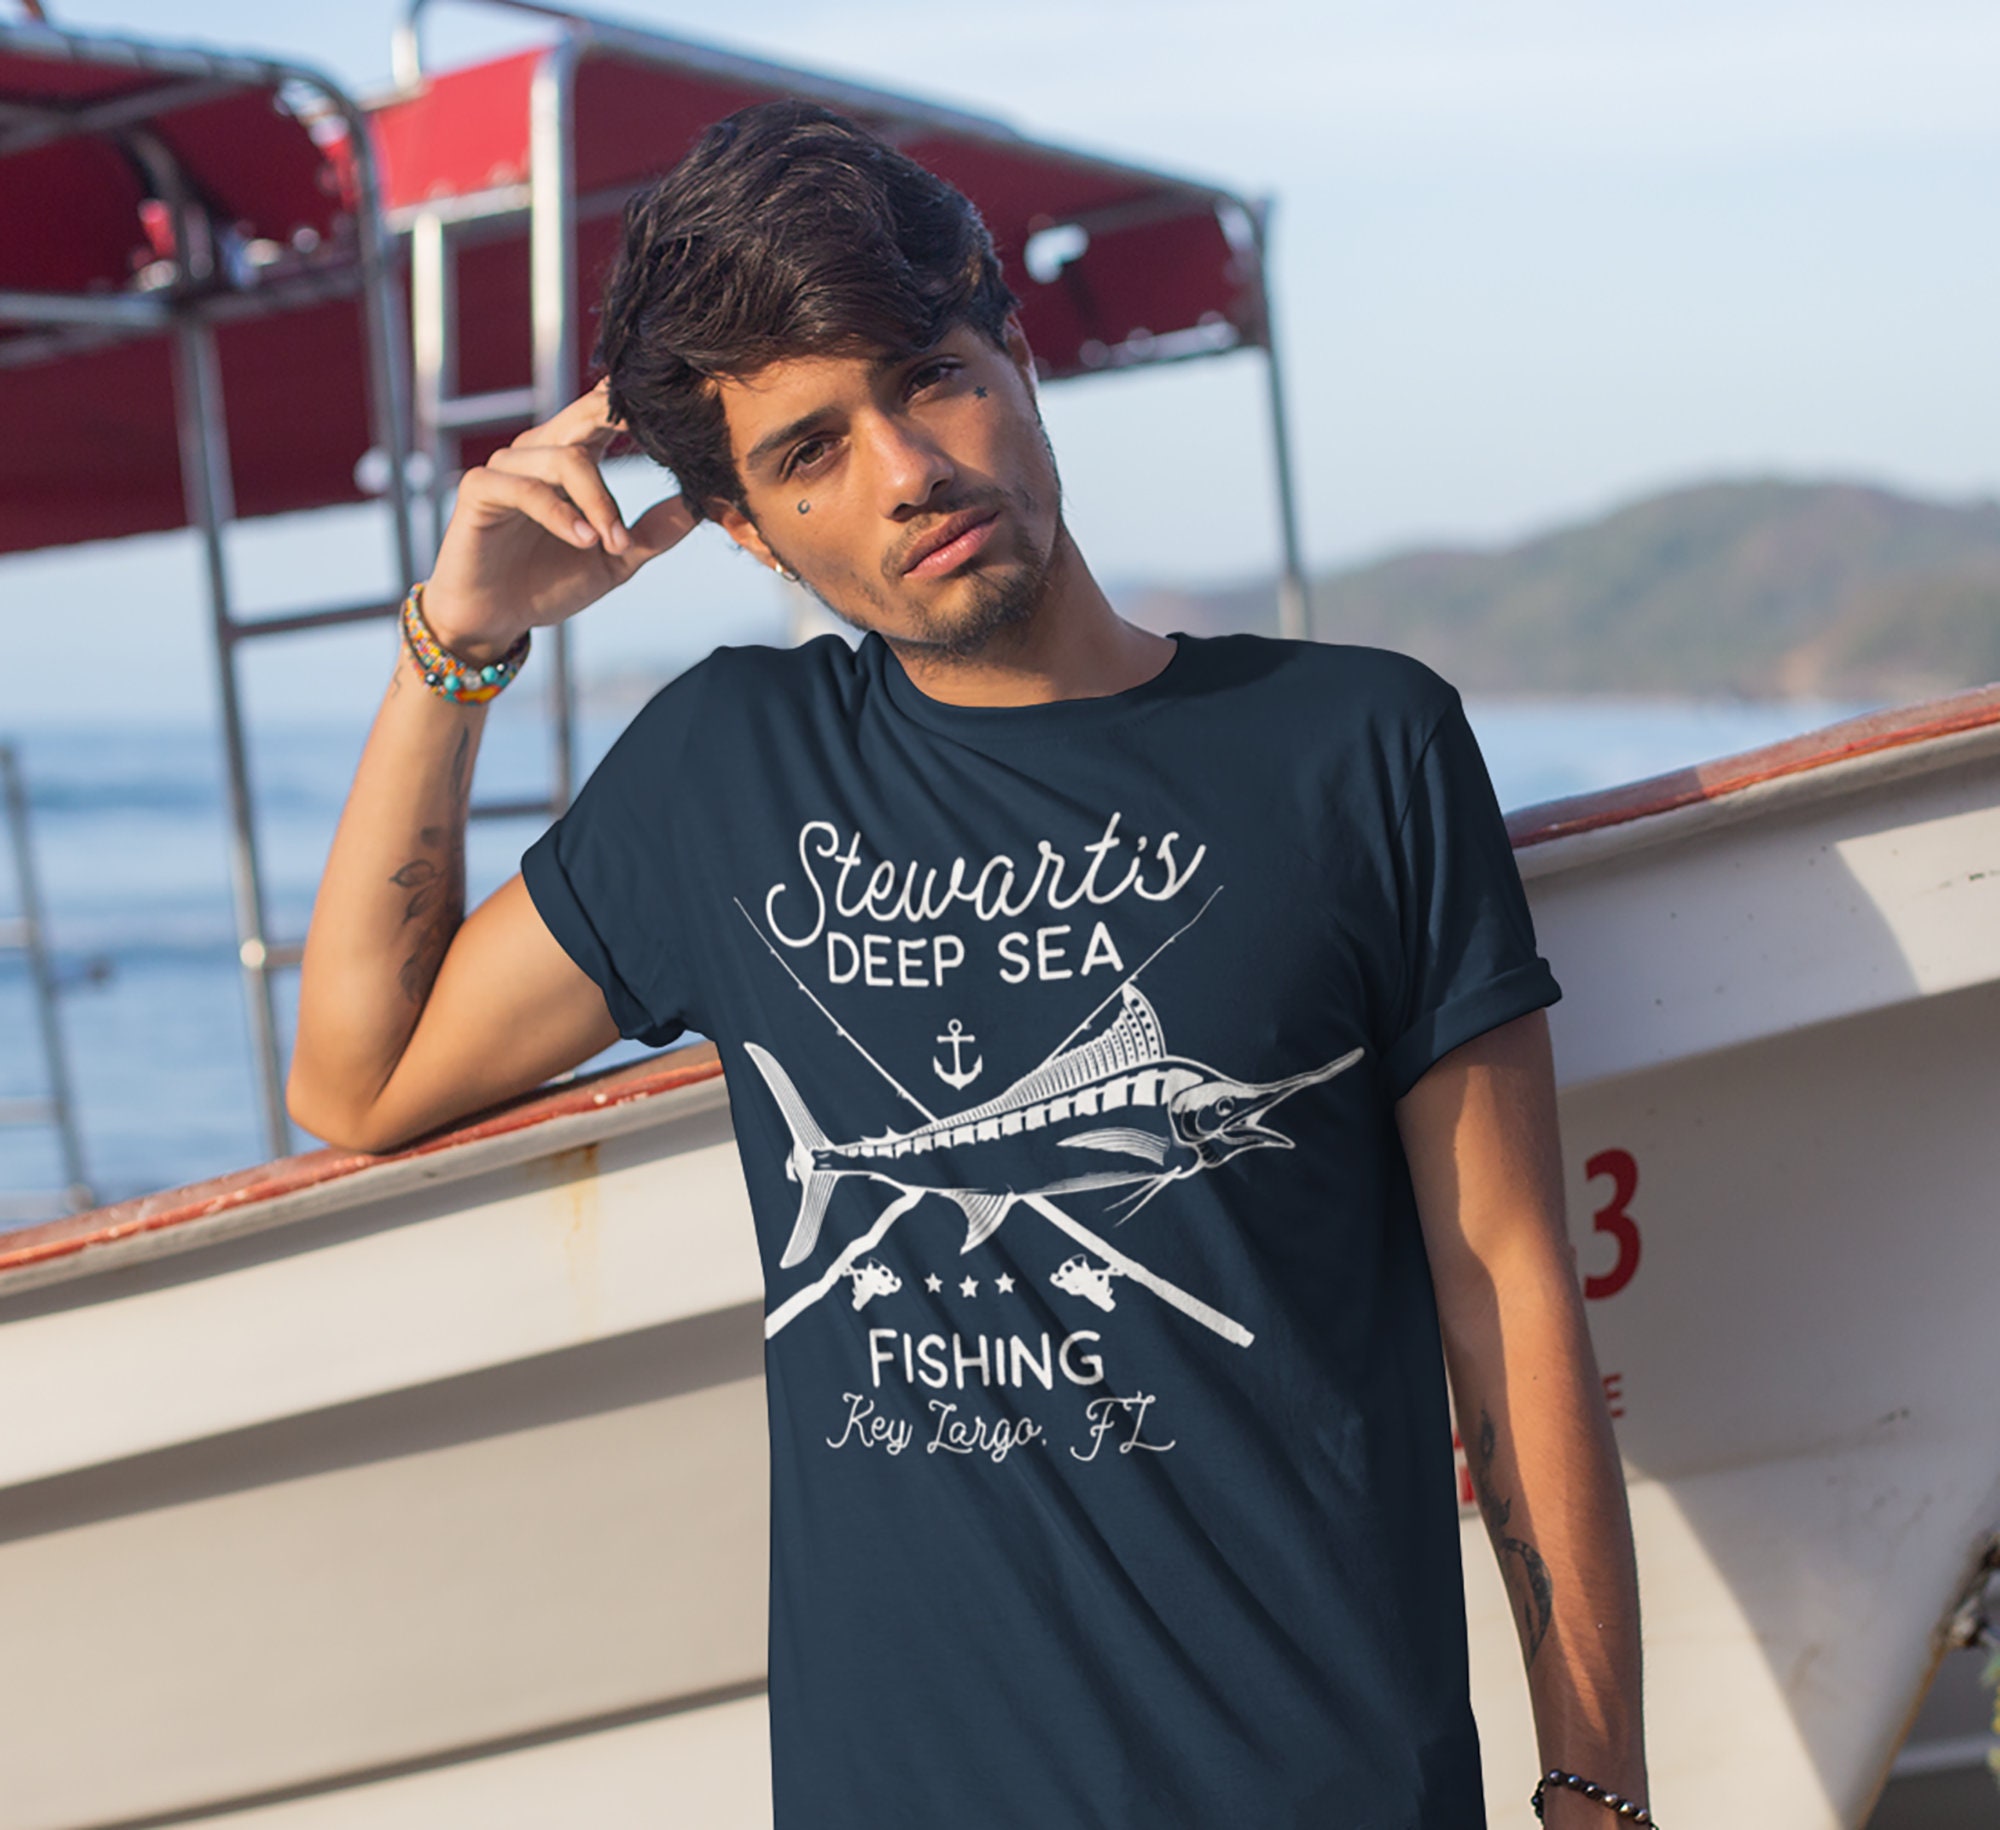 2. Factors to Consider When Choosing the Perfect Personalized Fishing T-Shirt